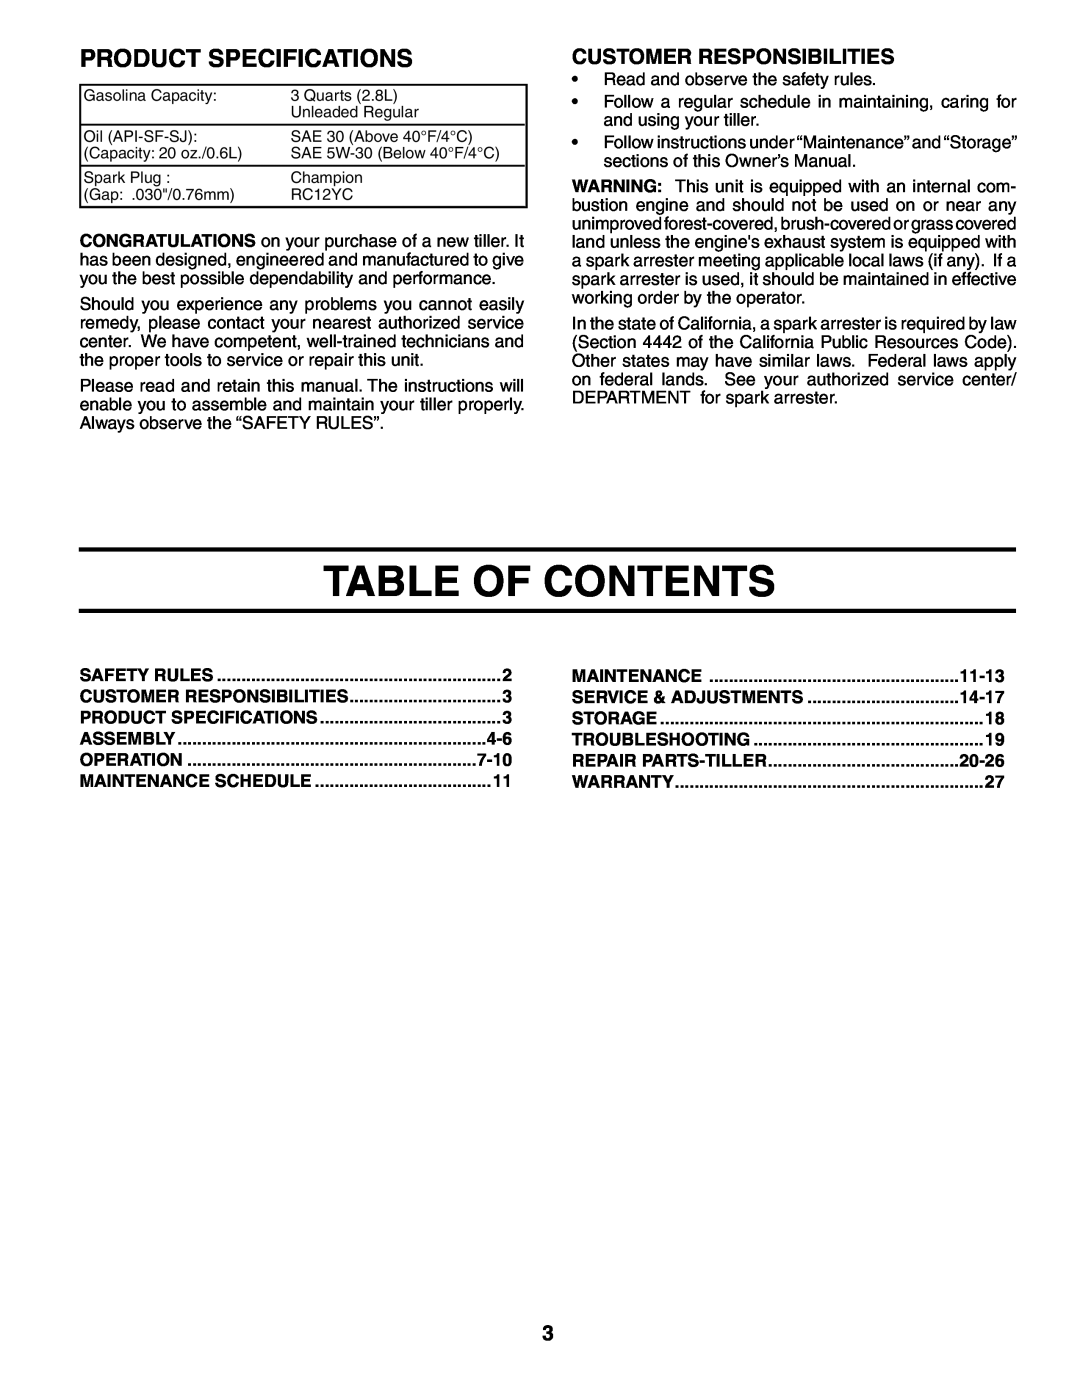 Poulan PRRT65D owner manual Table Of Contents, Product Specifications, Customer Responsibilities, 7-10, 11-13, 14-17, 20-26 